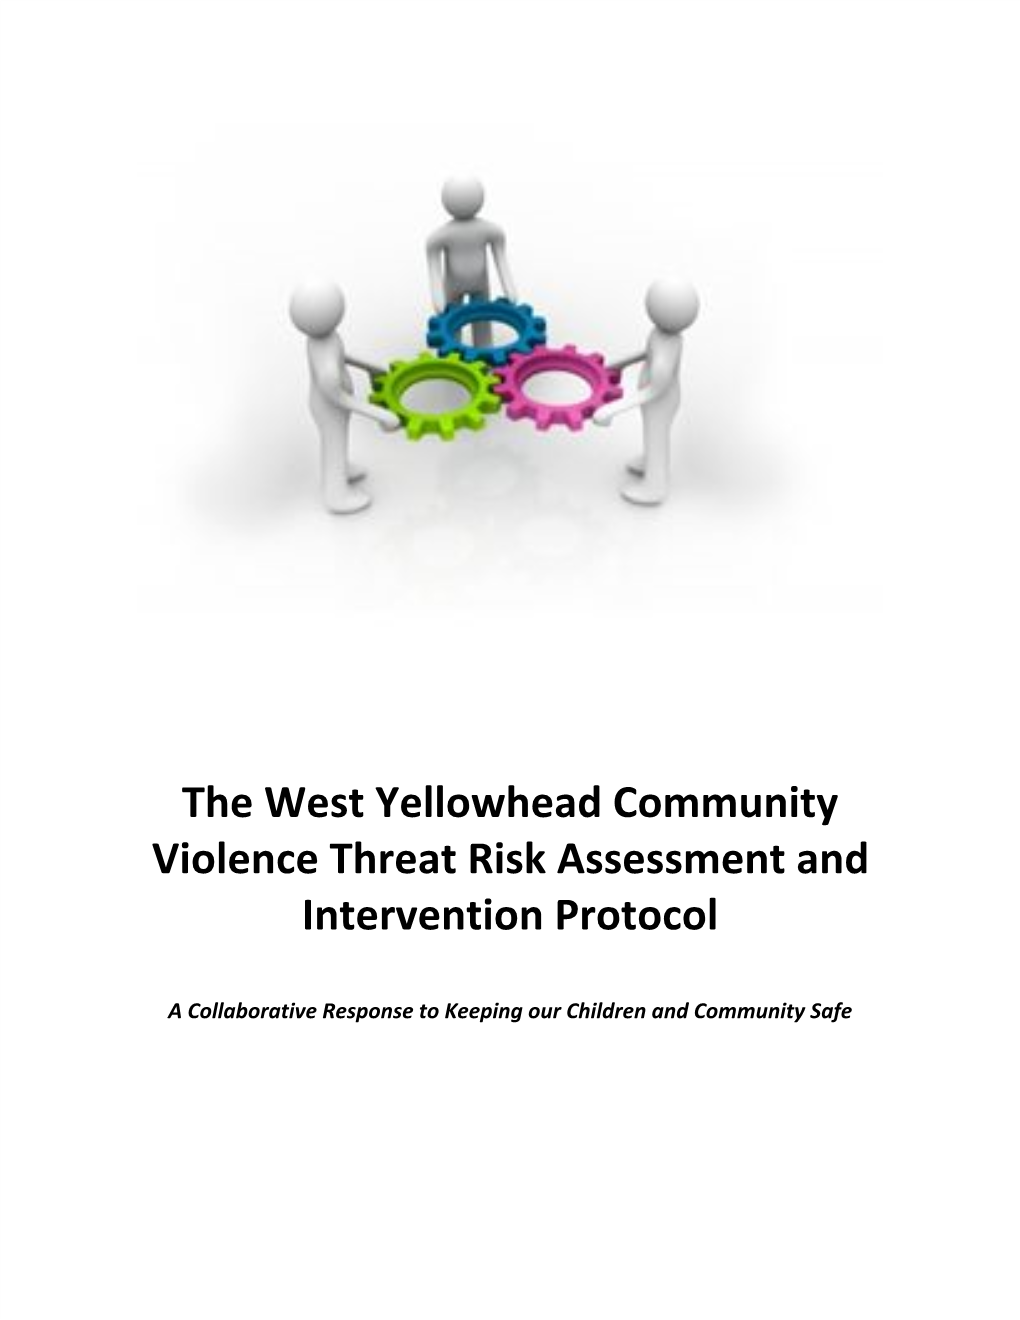 The West Yellowhead Community Violence Threat Risk Assessment and Intervention Protocol